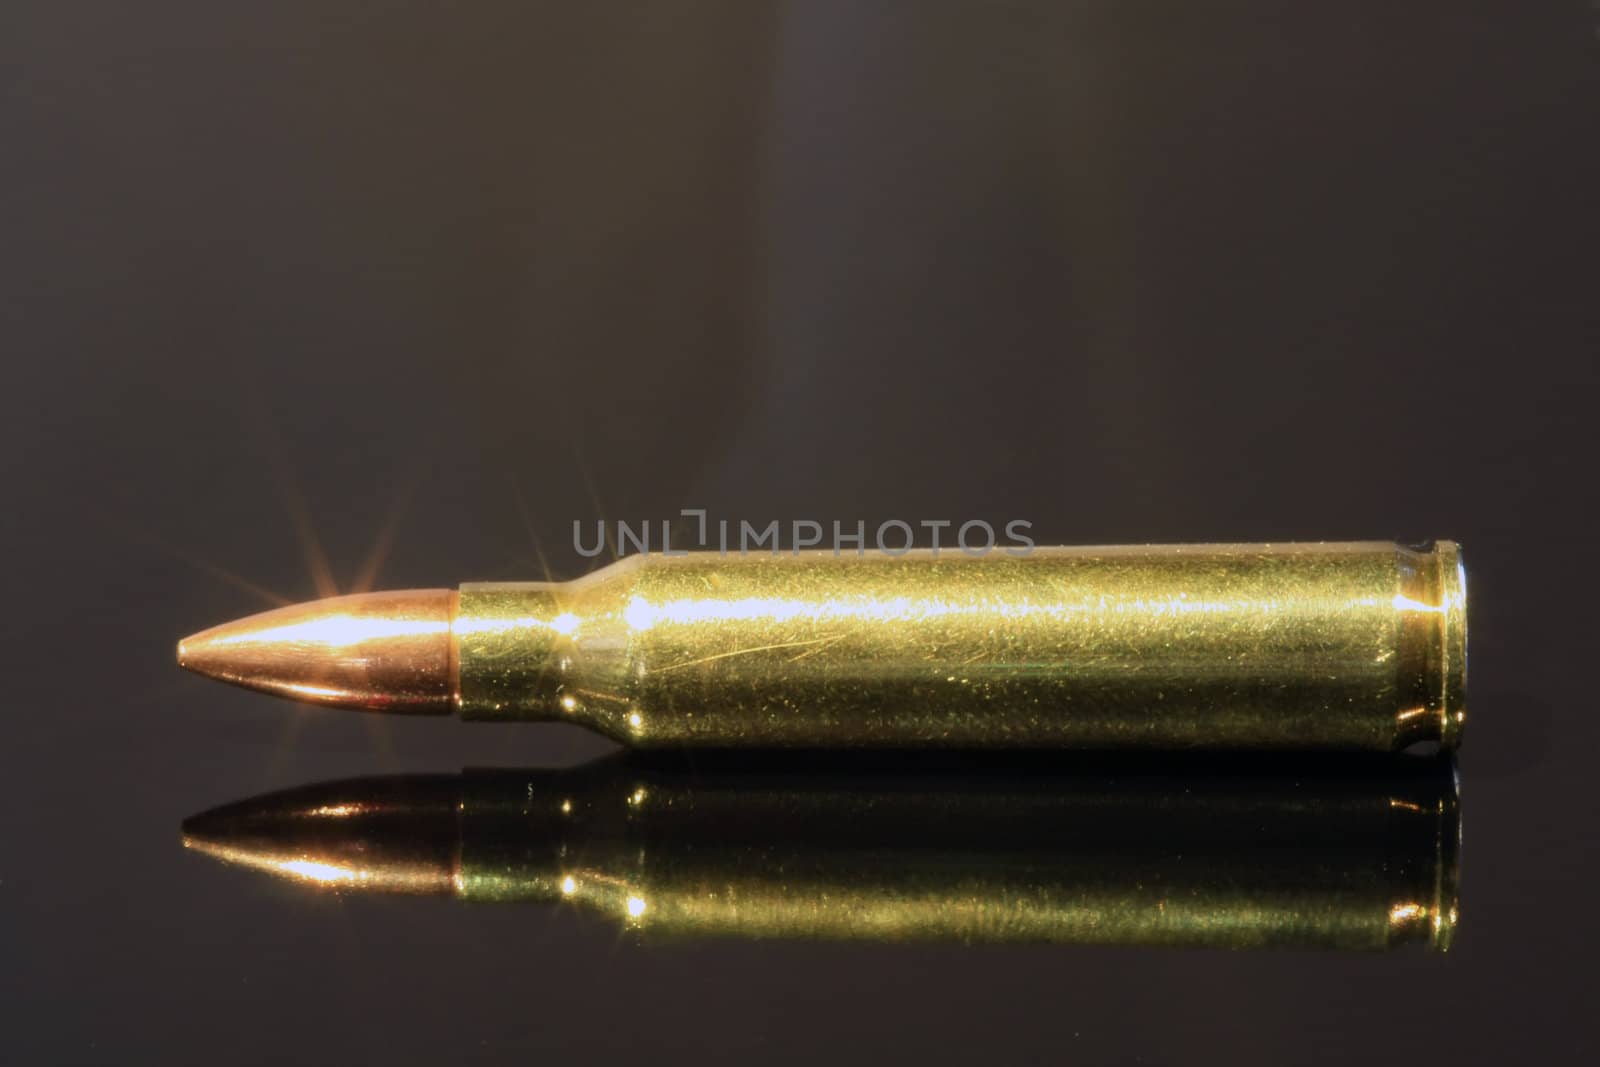 R5 / AK-47 bullet by ChrisAlleaume